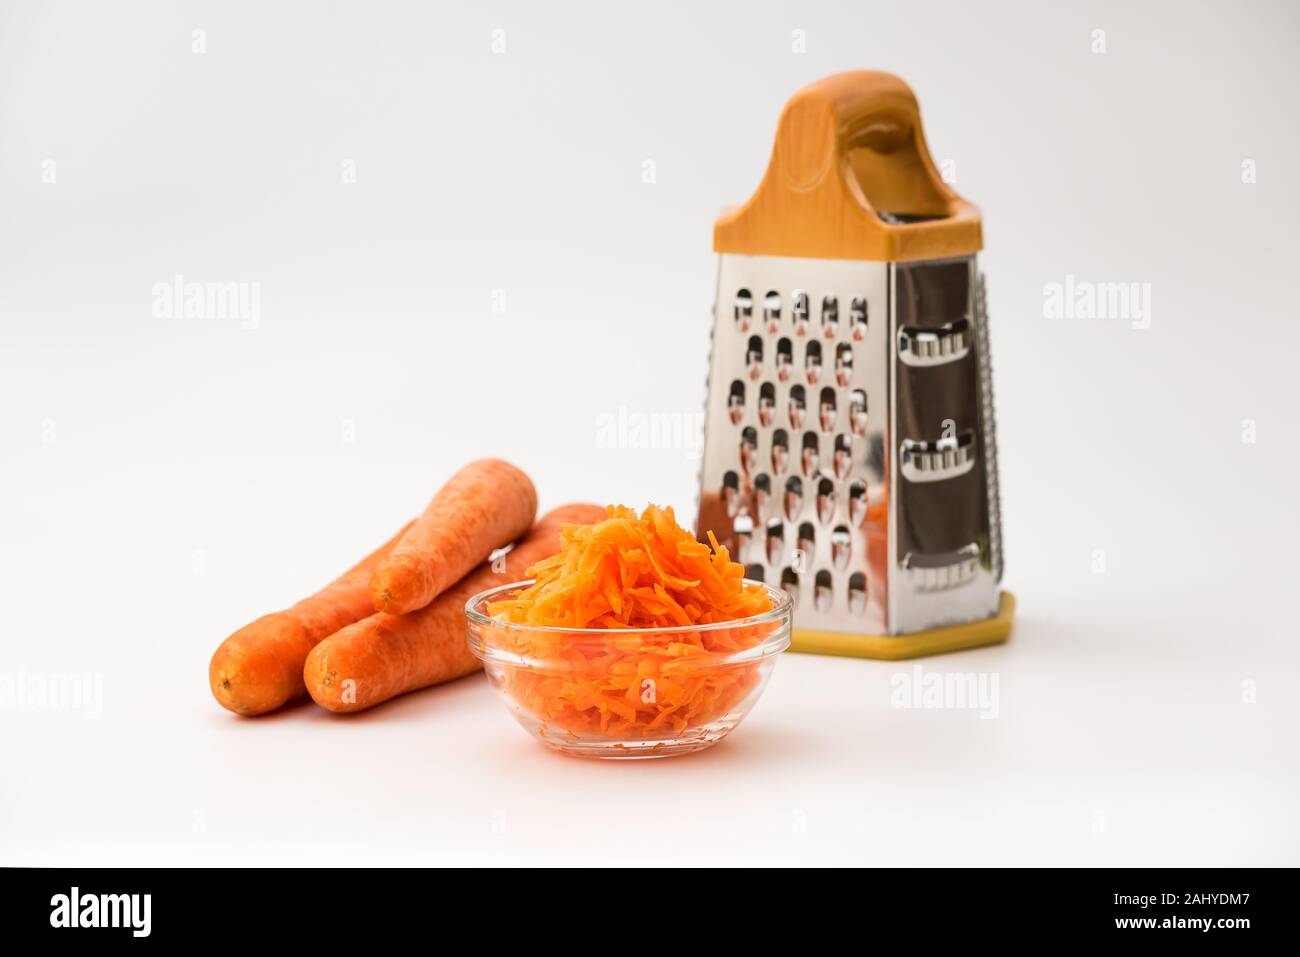 5+ Thousand Carrot Grater Royalty-Free Images, Stock Photos